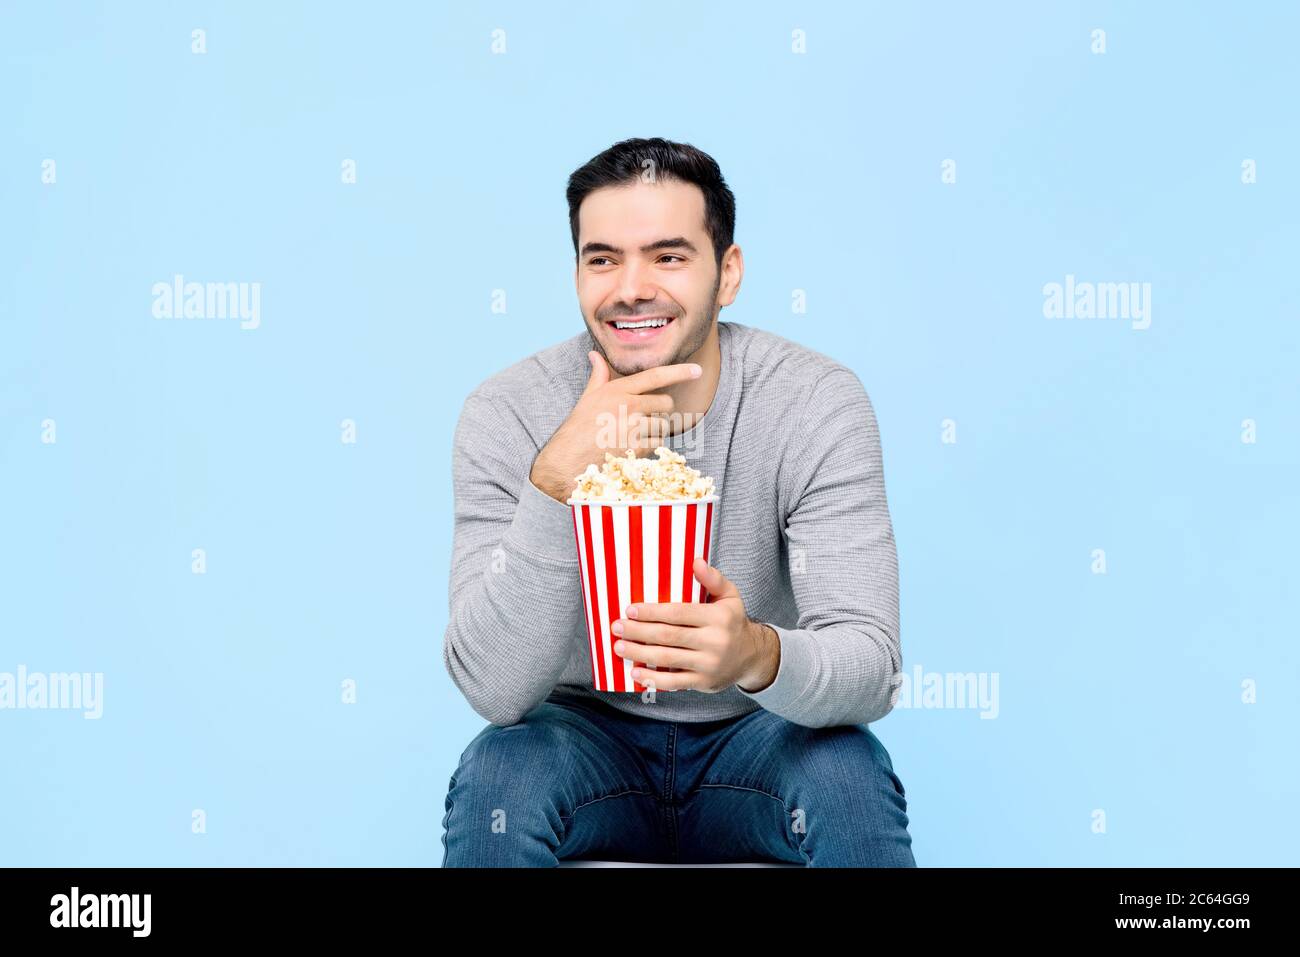 Laughing young man holding popcorn while watching movie isolated on light blue background Stock Photo